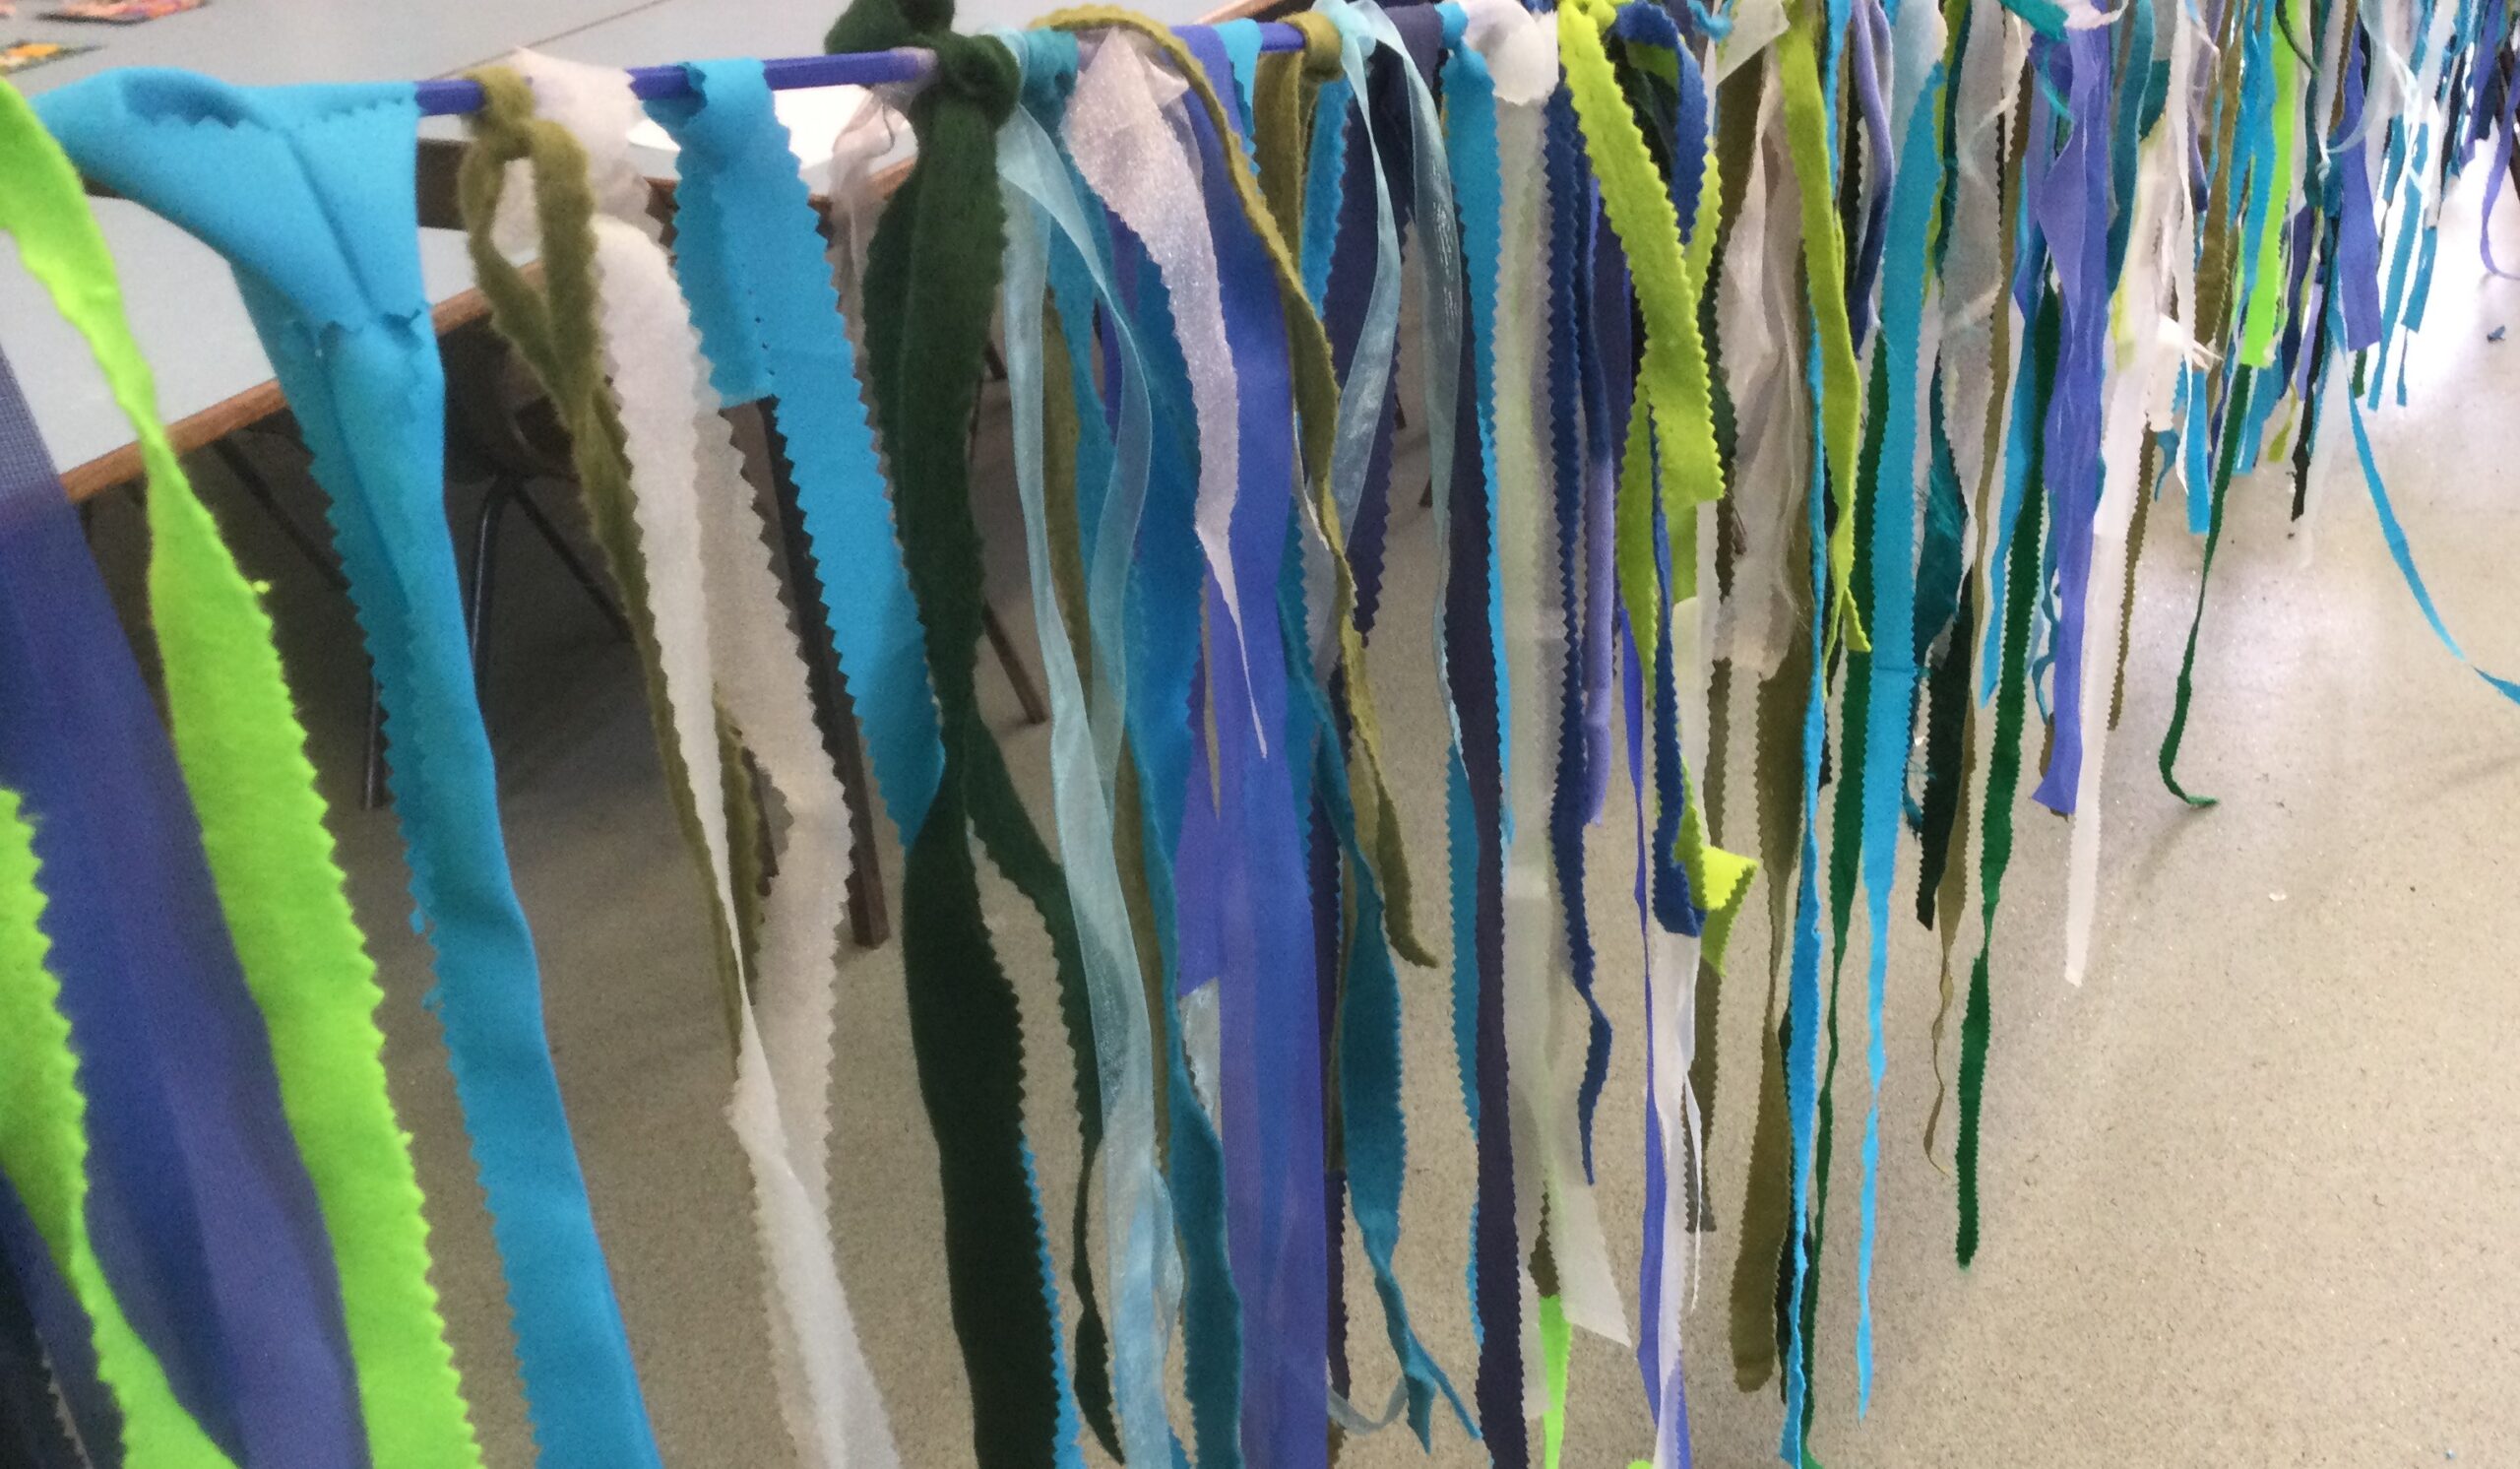 Strips of blue, green and white fabric strung from blue tape to create sea-like bunting